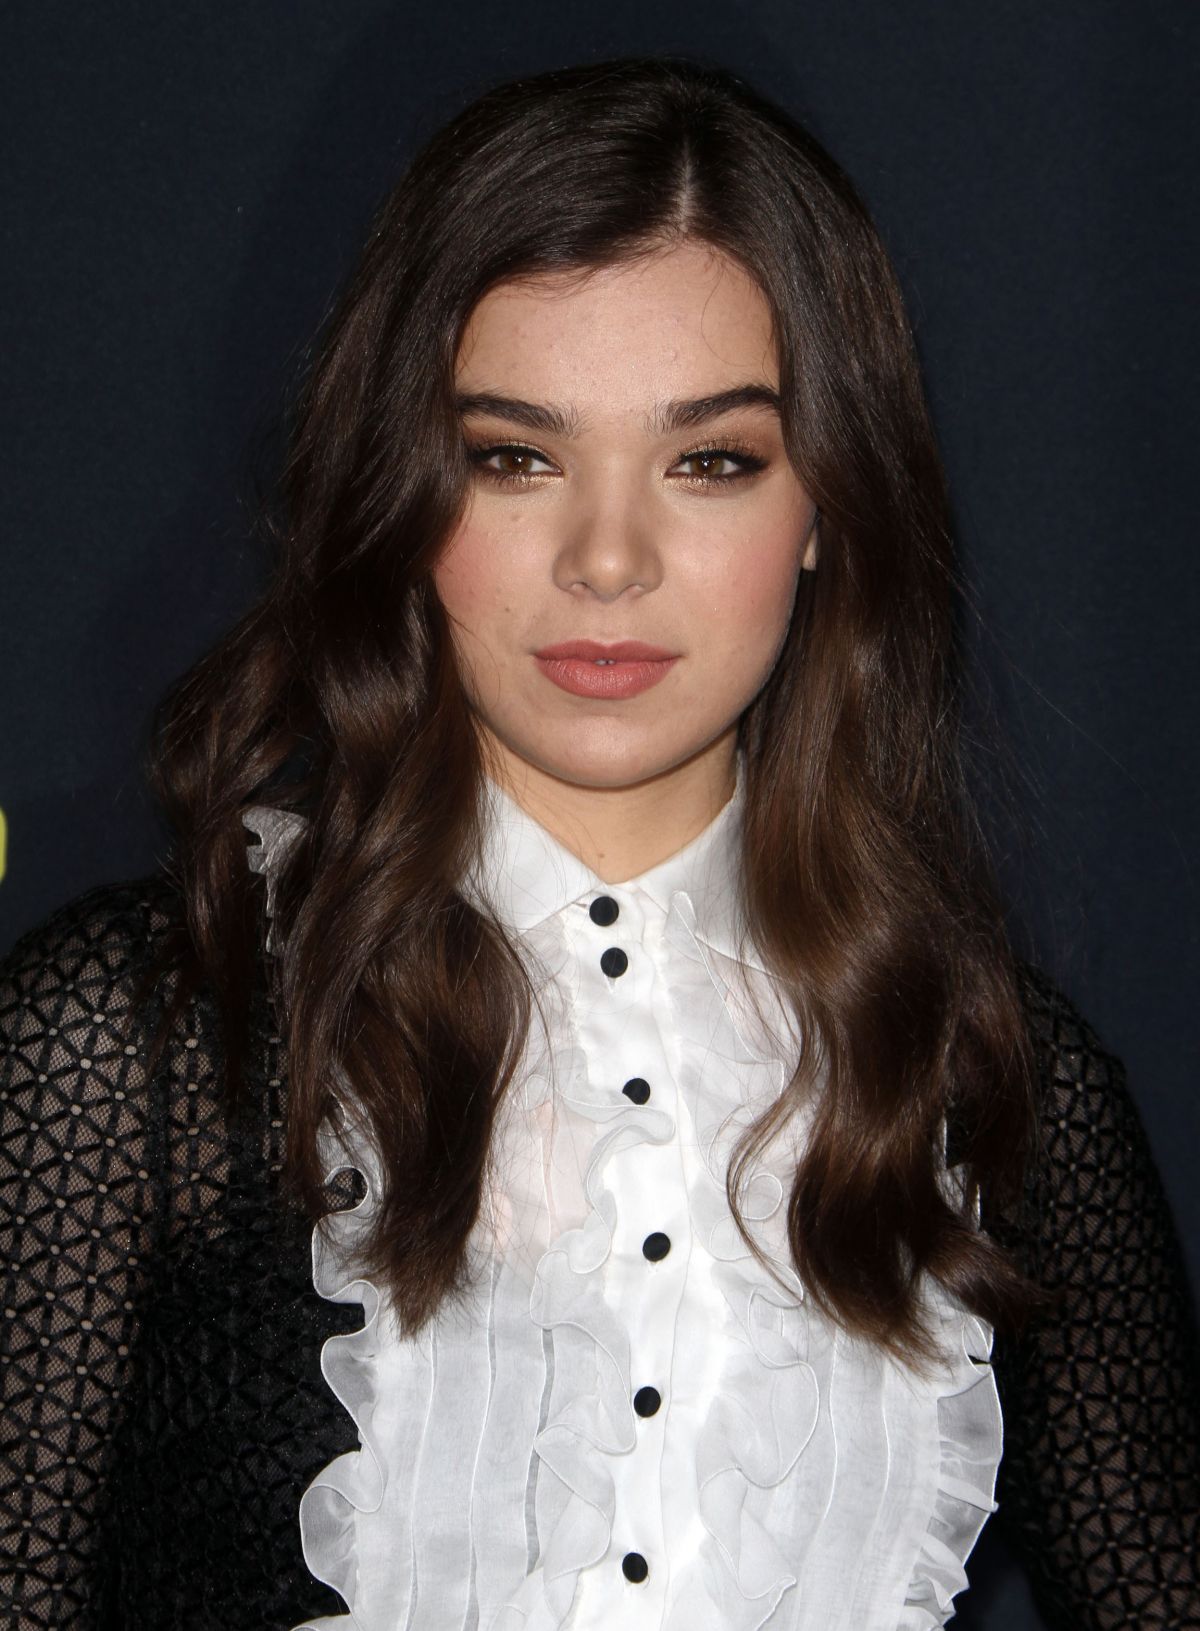 HAILEE STEINFELD at Pitch Perfect 2 Premiere in Los Angeles – HawtCelebs